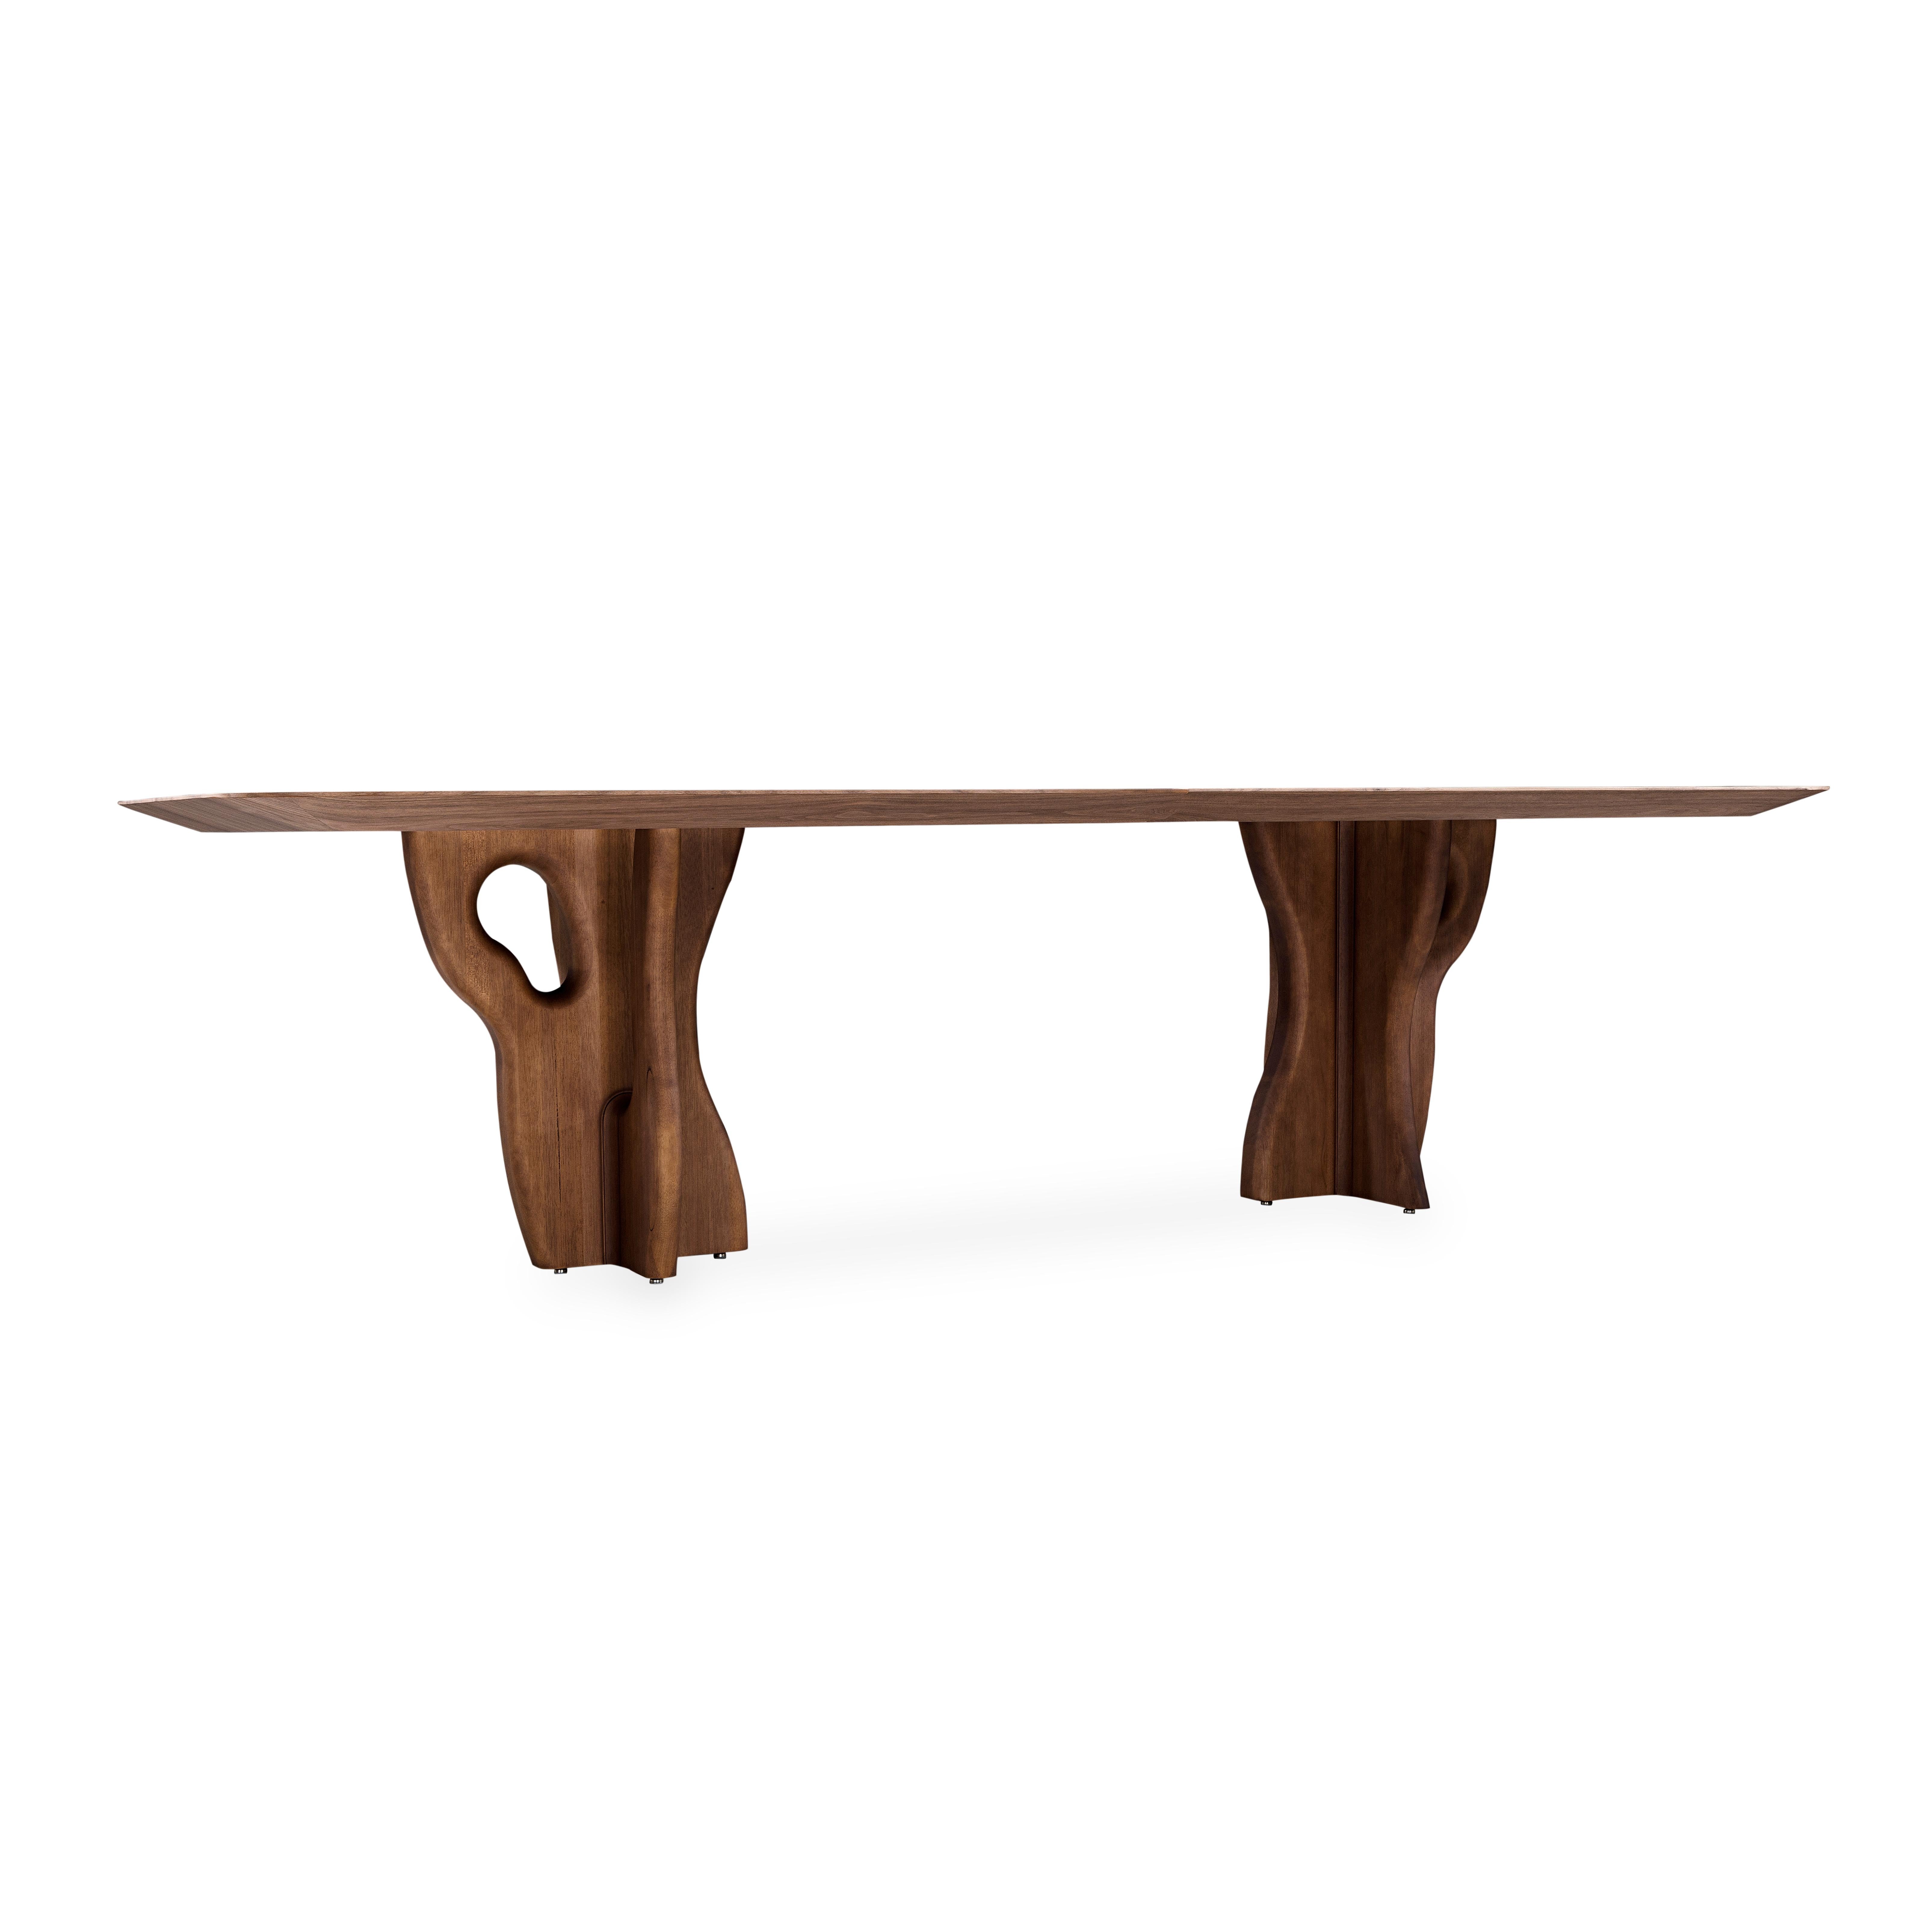 Brazilian Suma Dining Table with Walnut Veneered Top and Organic Solid Wood Legs 110'' For Sale